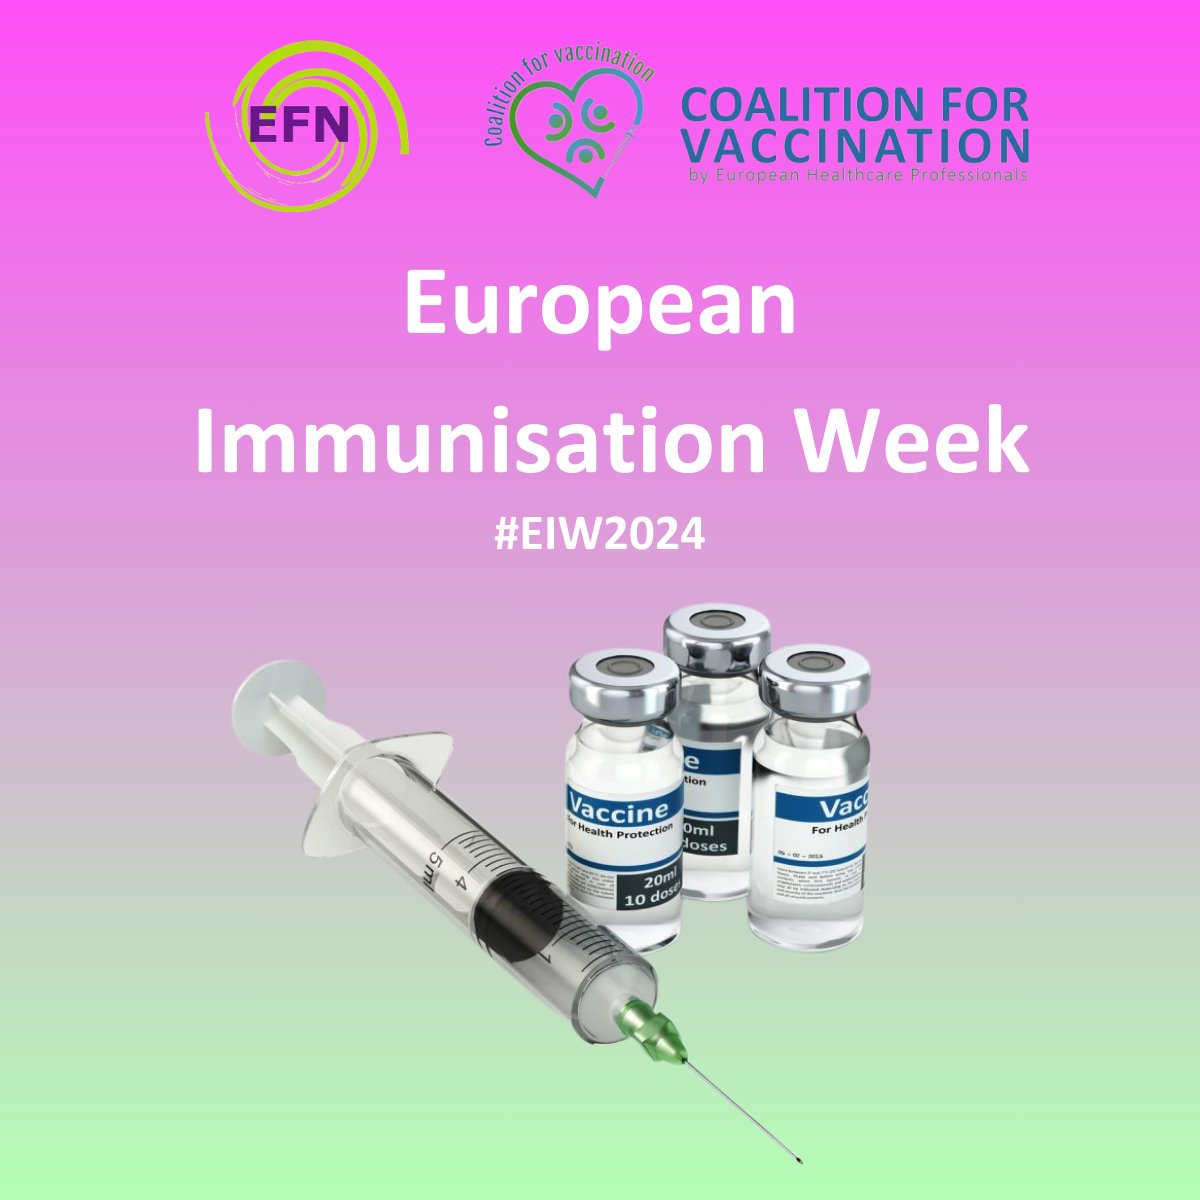 The Tdap Vaccine protects against three of the original #EPI diseases. Since then, many lives have been saved, but despite this, recently the rate of contagion from Diphtheria and Whooping Cough have increased. Get Vaccinated!#EFN #EIW2024 #GetVaccinated #Nurses #Prevention